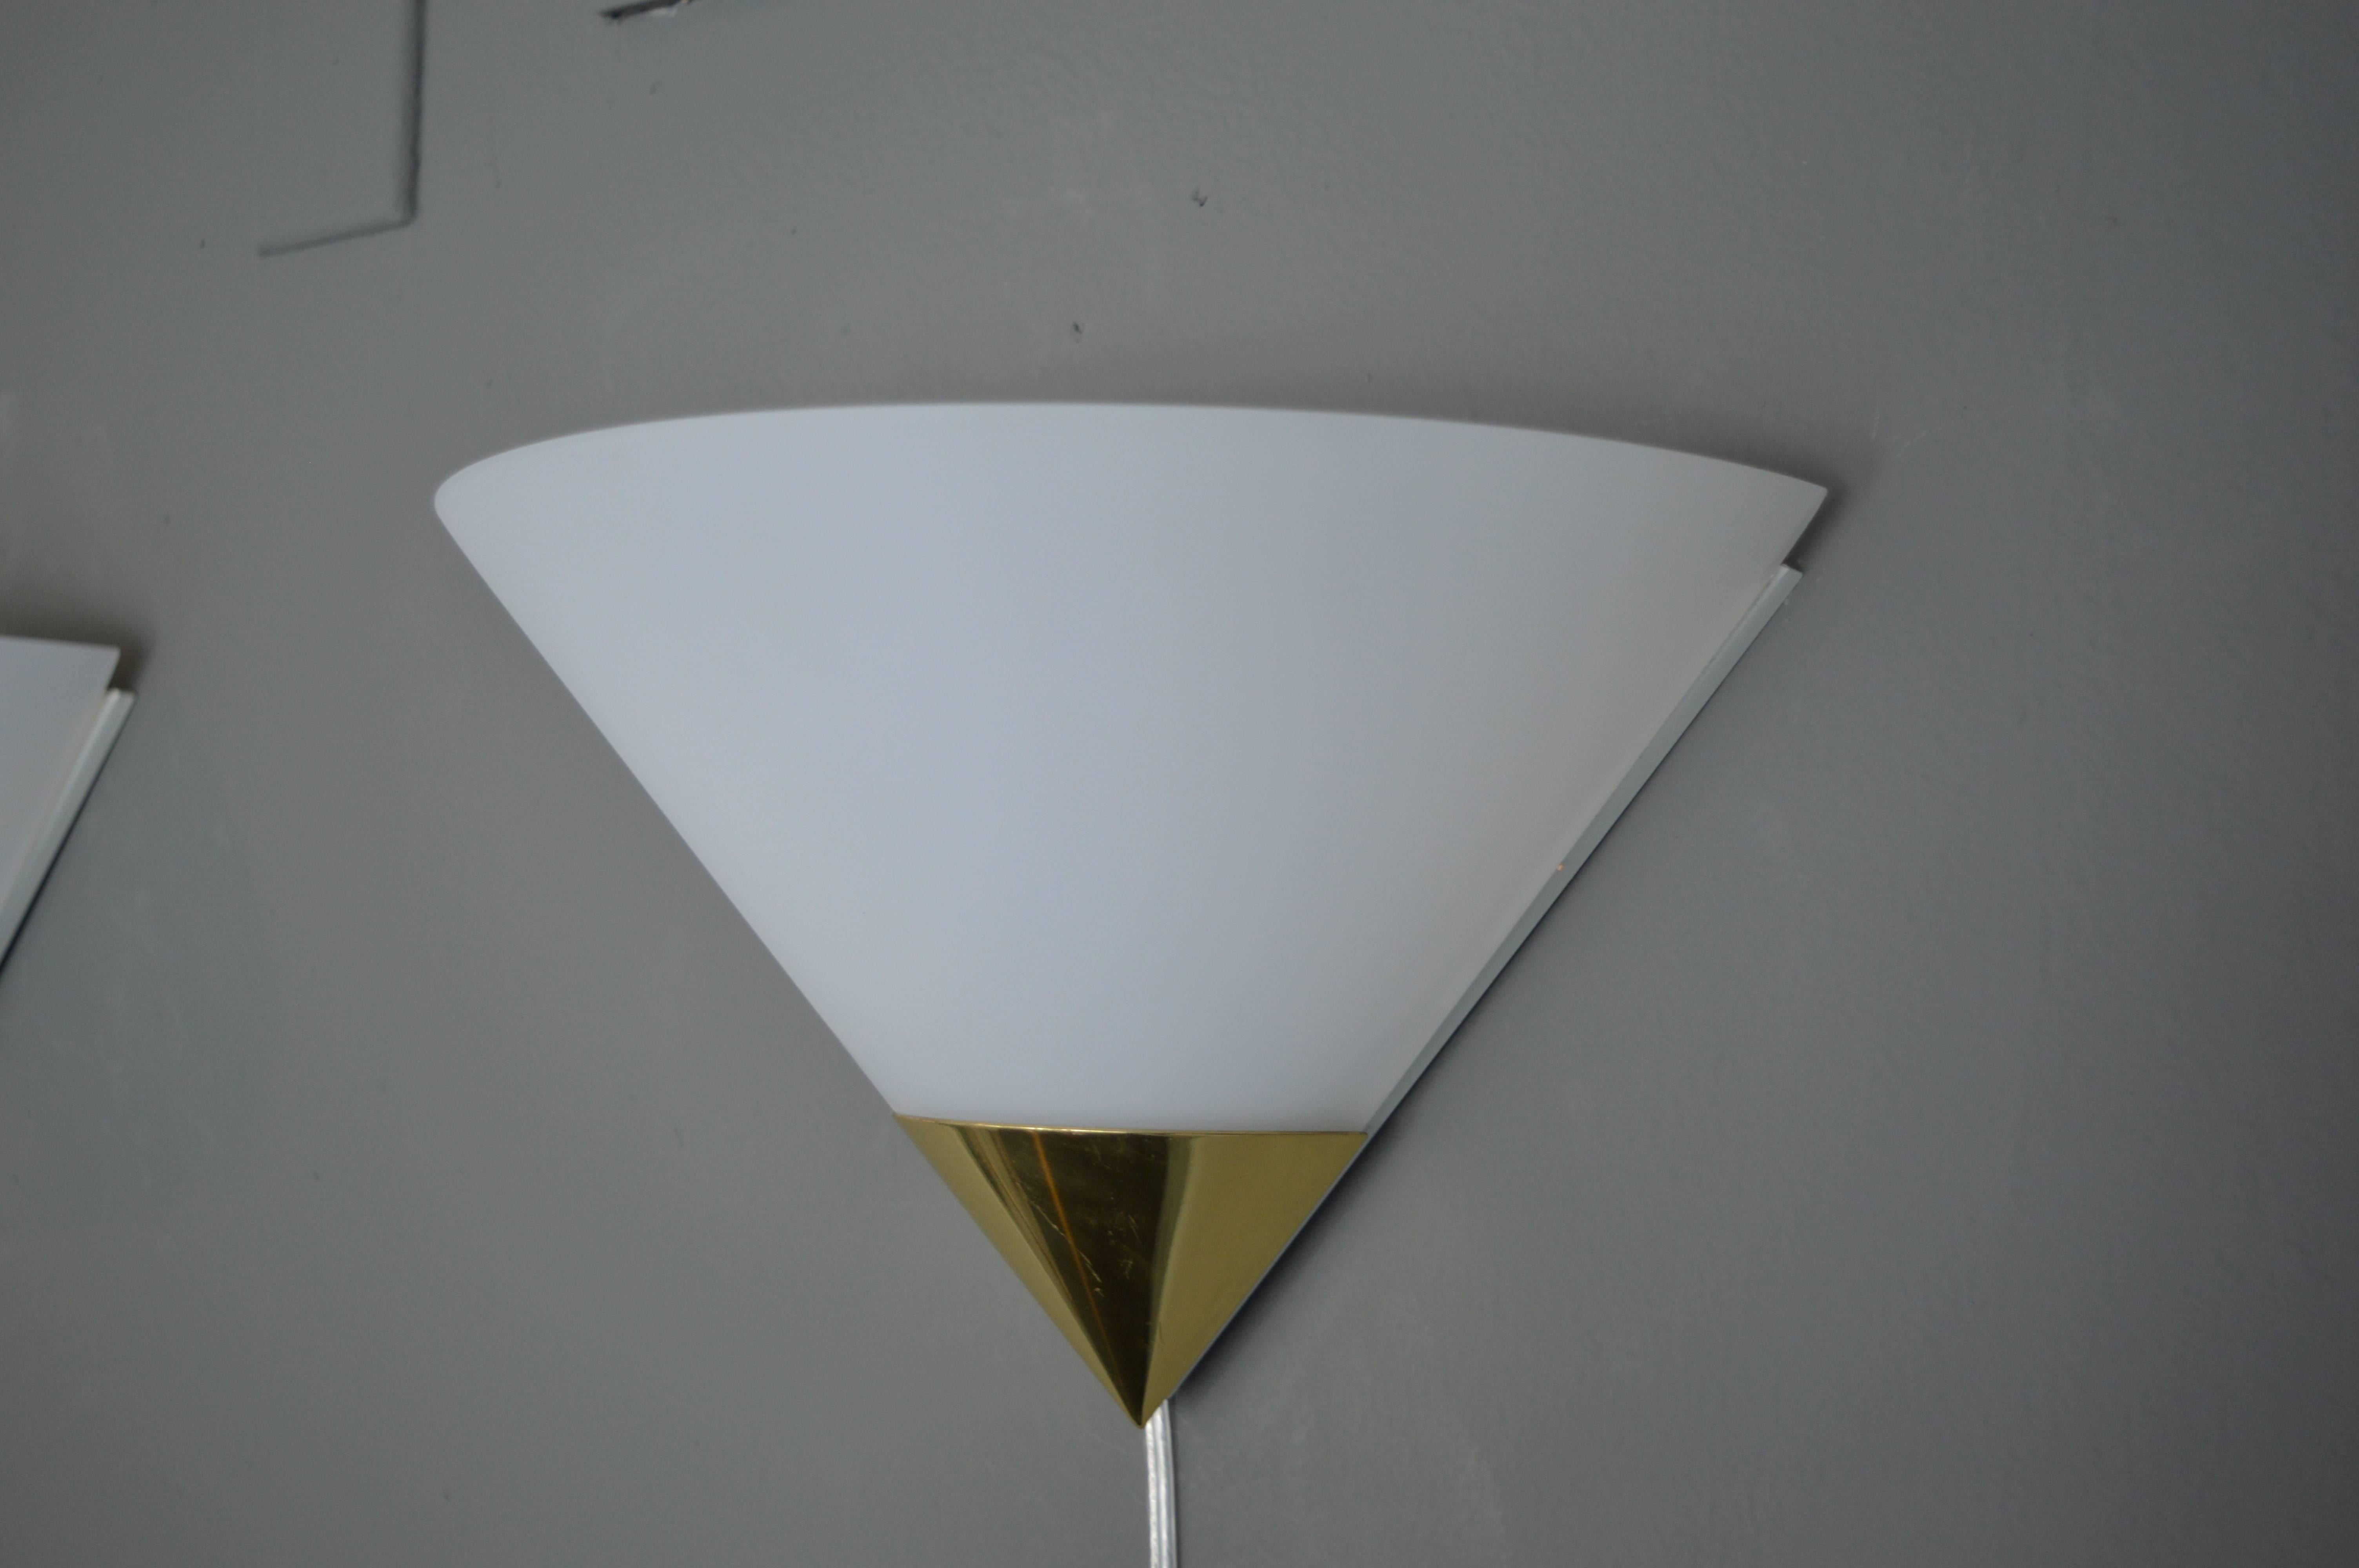 Excellent pair of brass and glass triangular sconces. Powder coated steel frame, brass base and opaque glass shade. Light scratches to brass. Newly rewired. Excellent vintage condition.